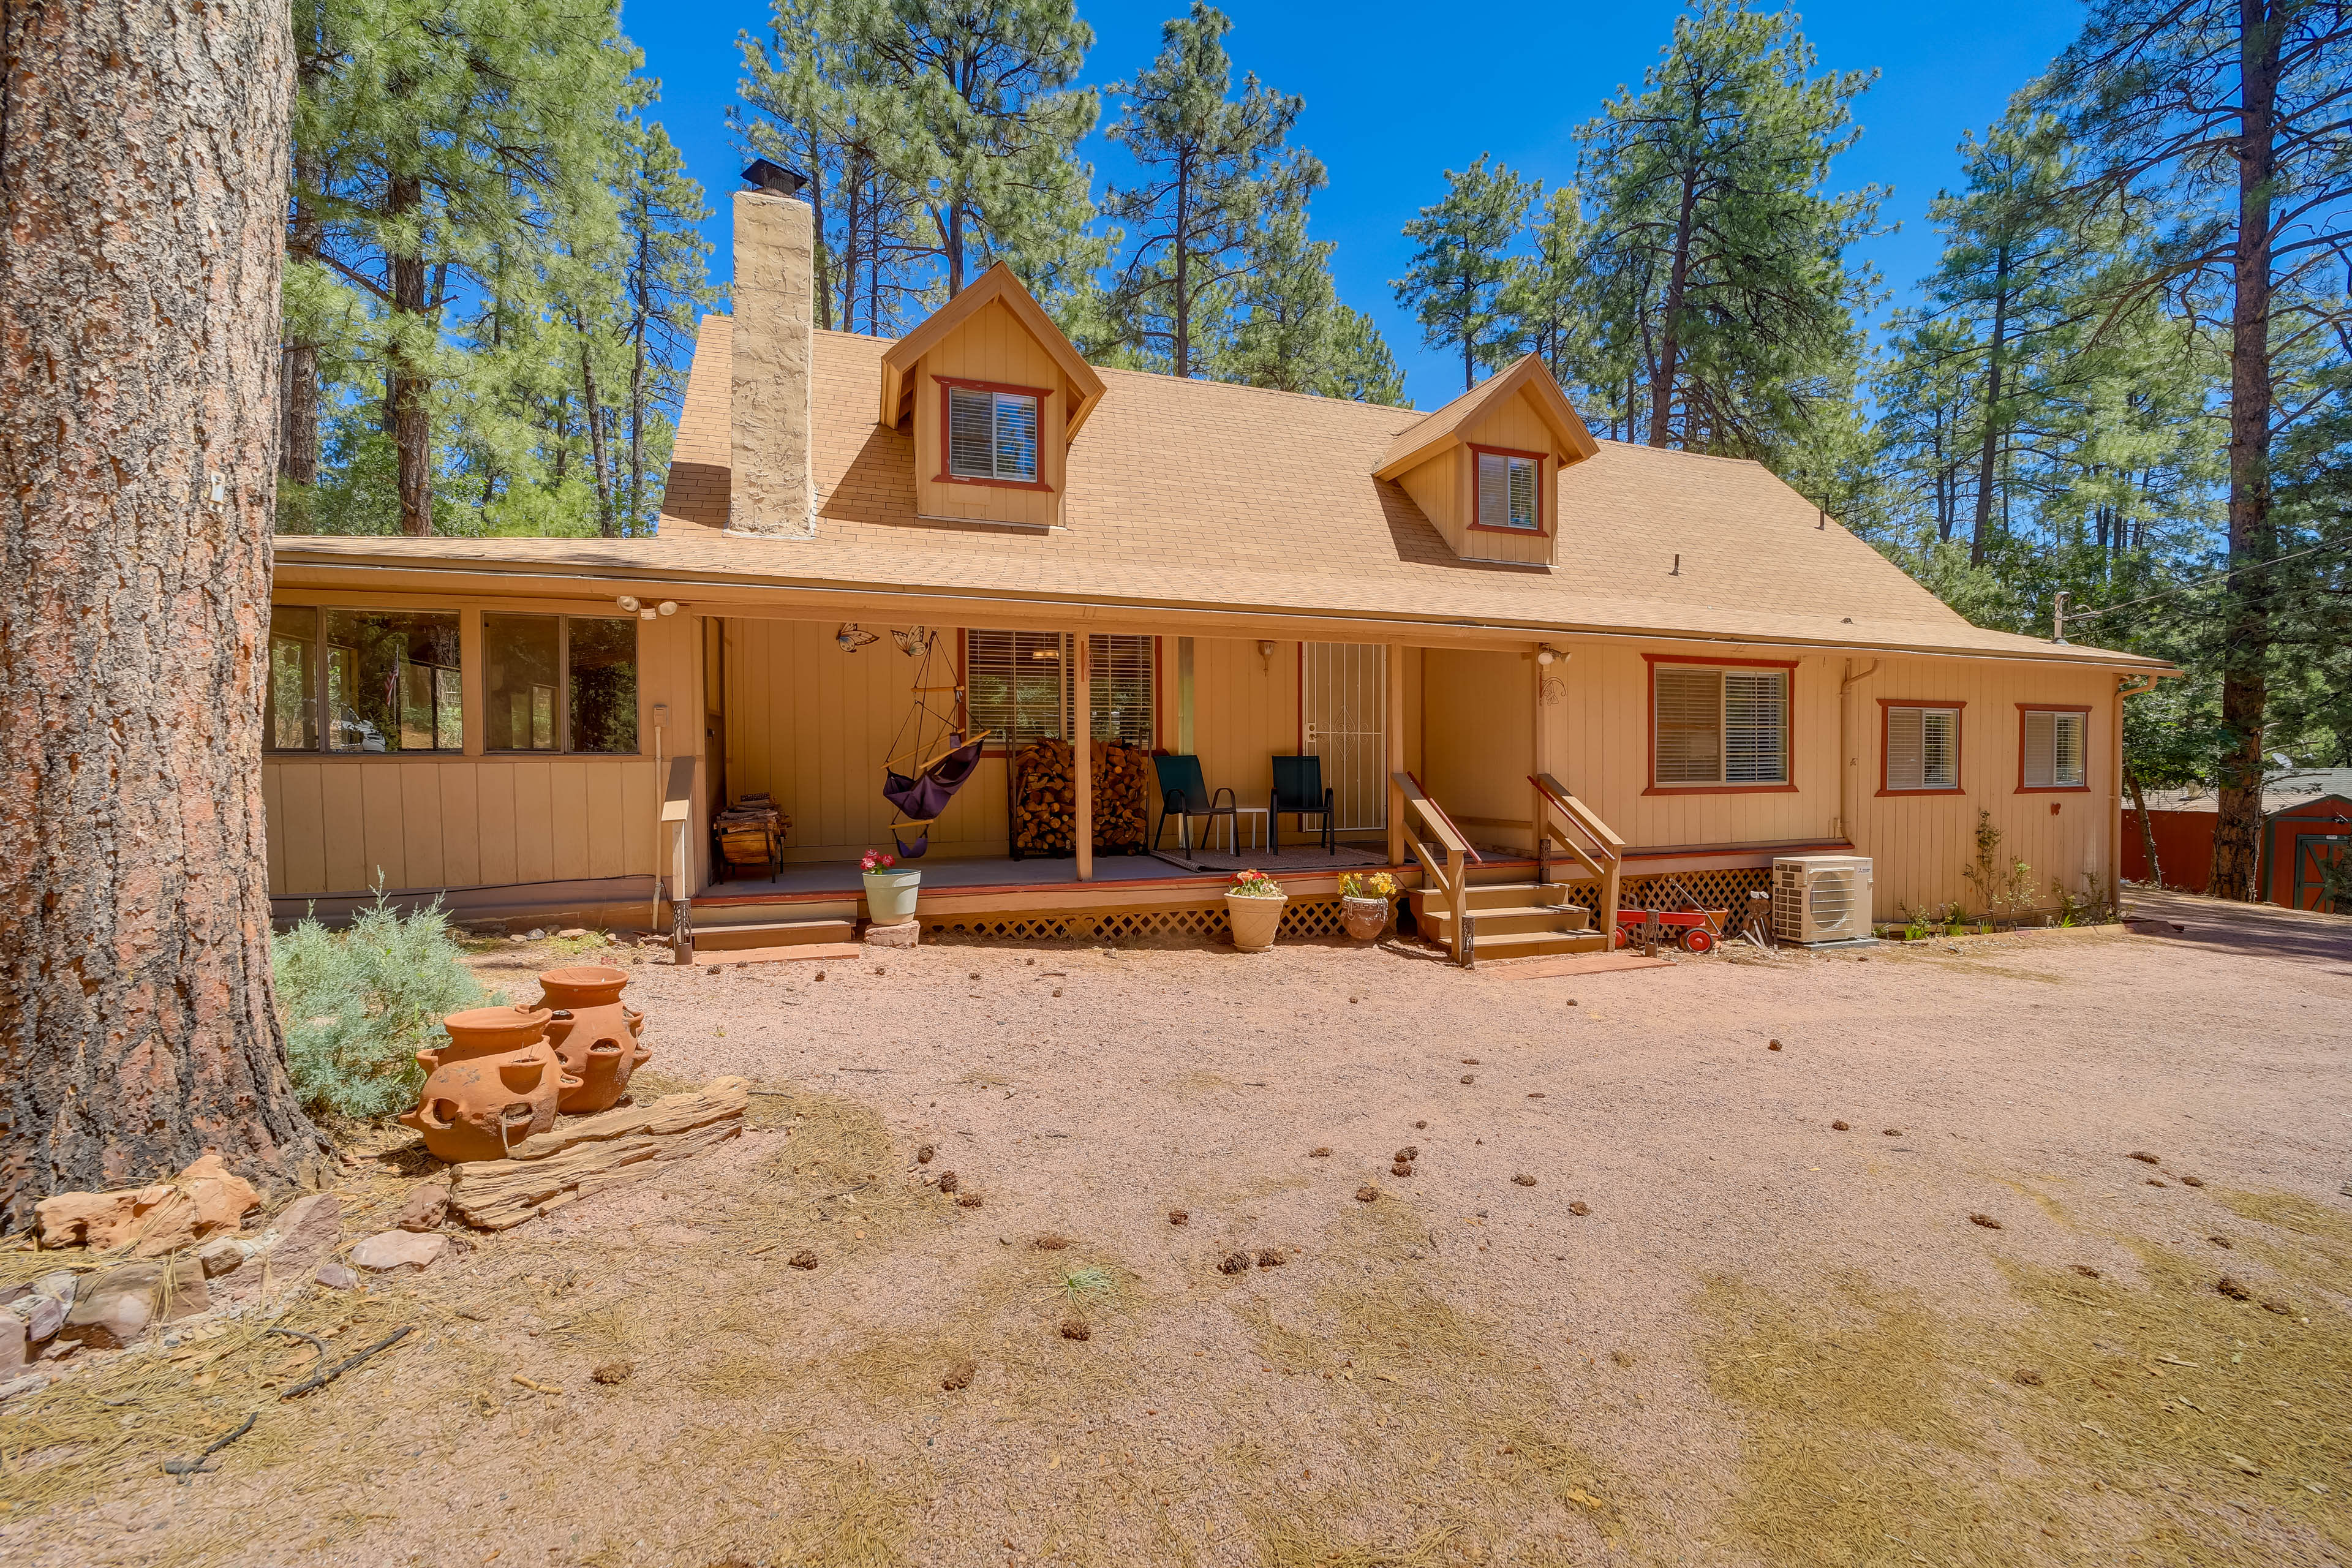 Pine Vacation Rental | 8BR | 4BA | 3,000 Sq Ft | Stairs Required